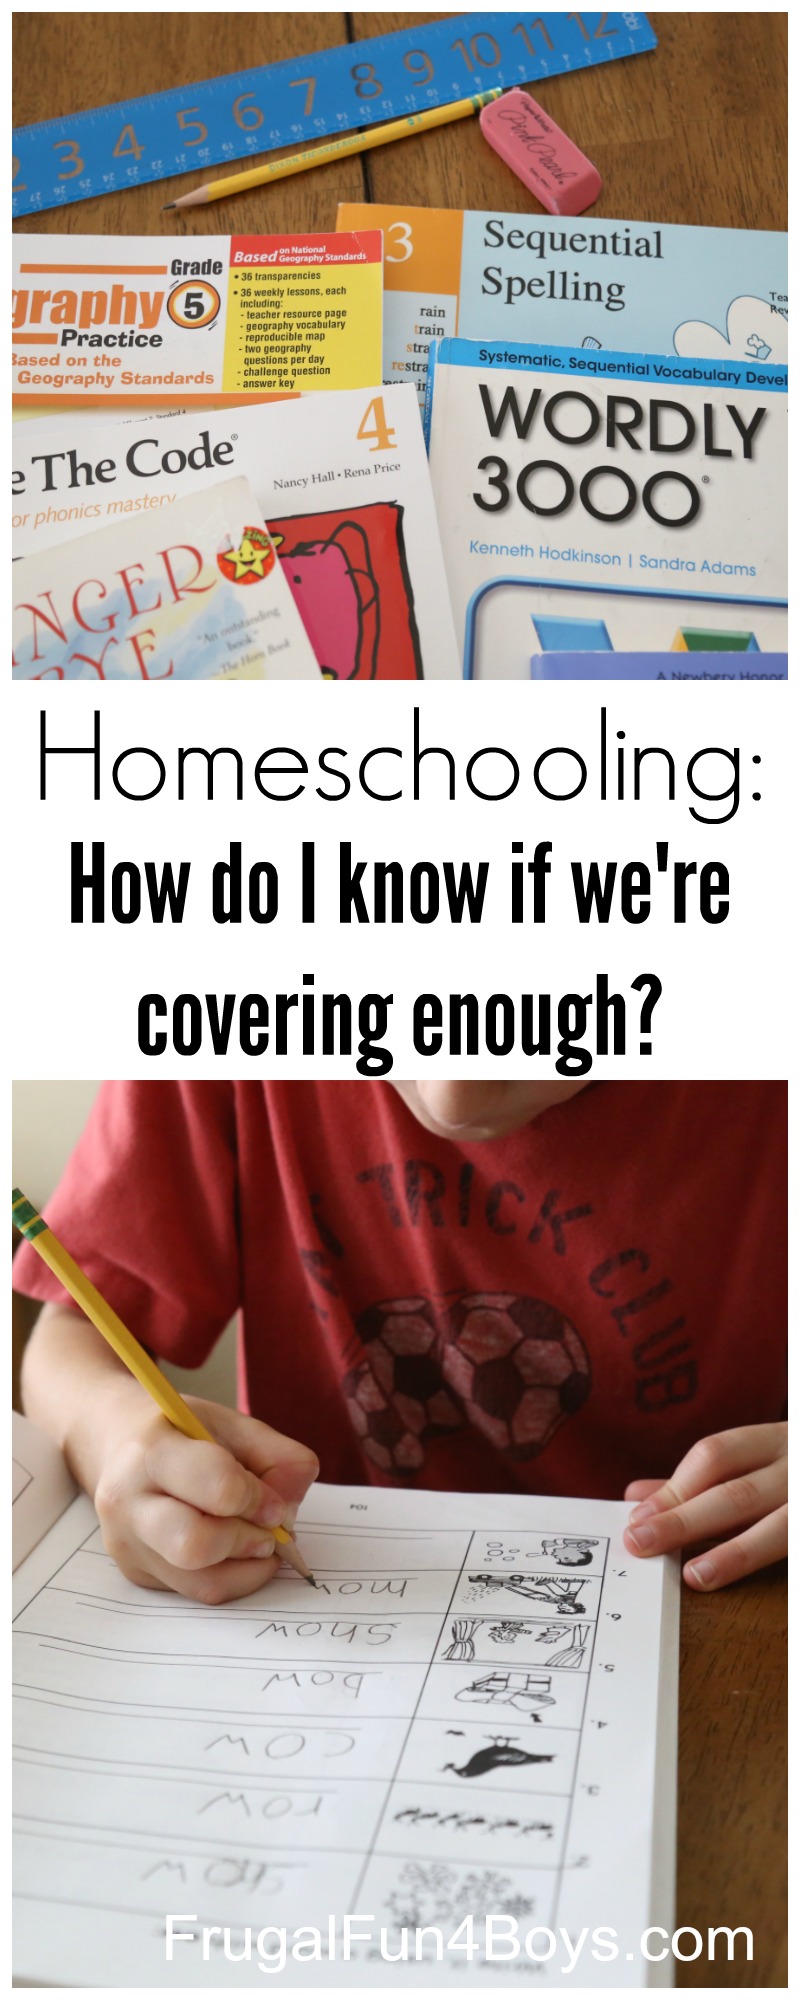 Homeschooling: How do I know if we're covering enough?